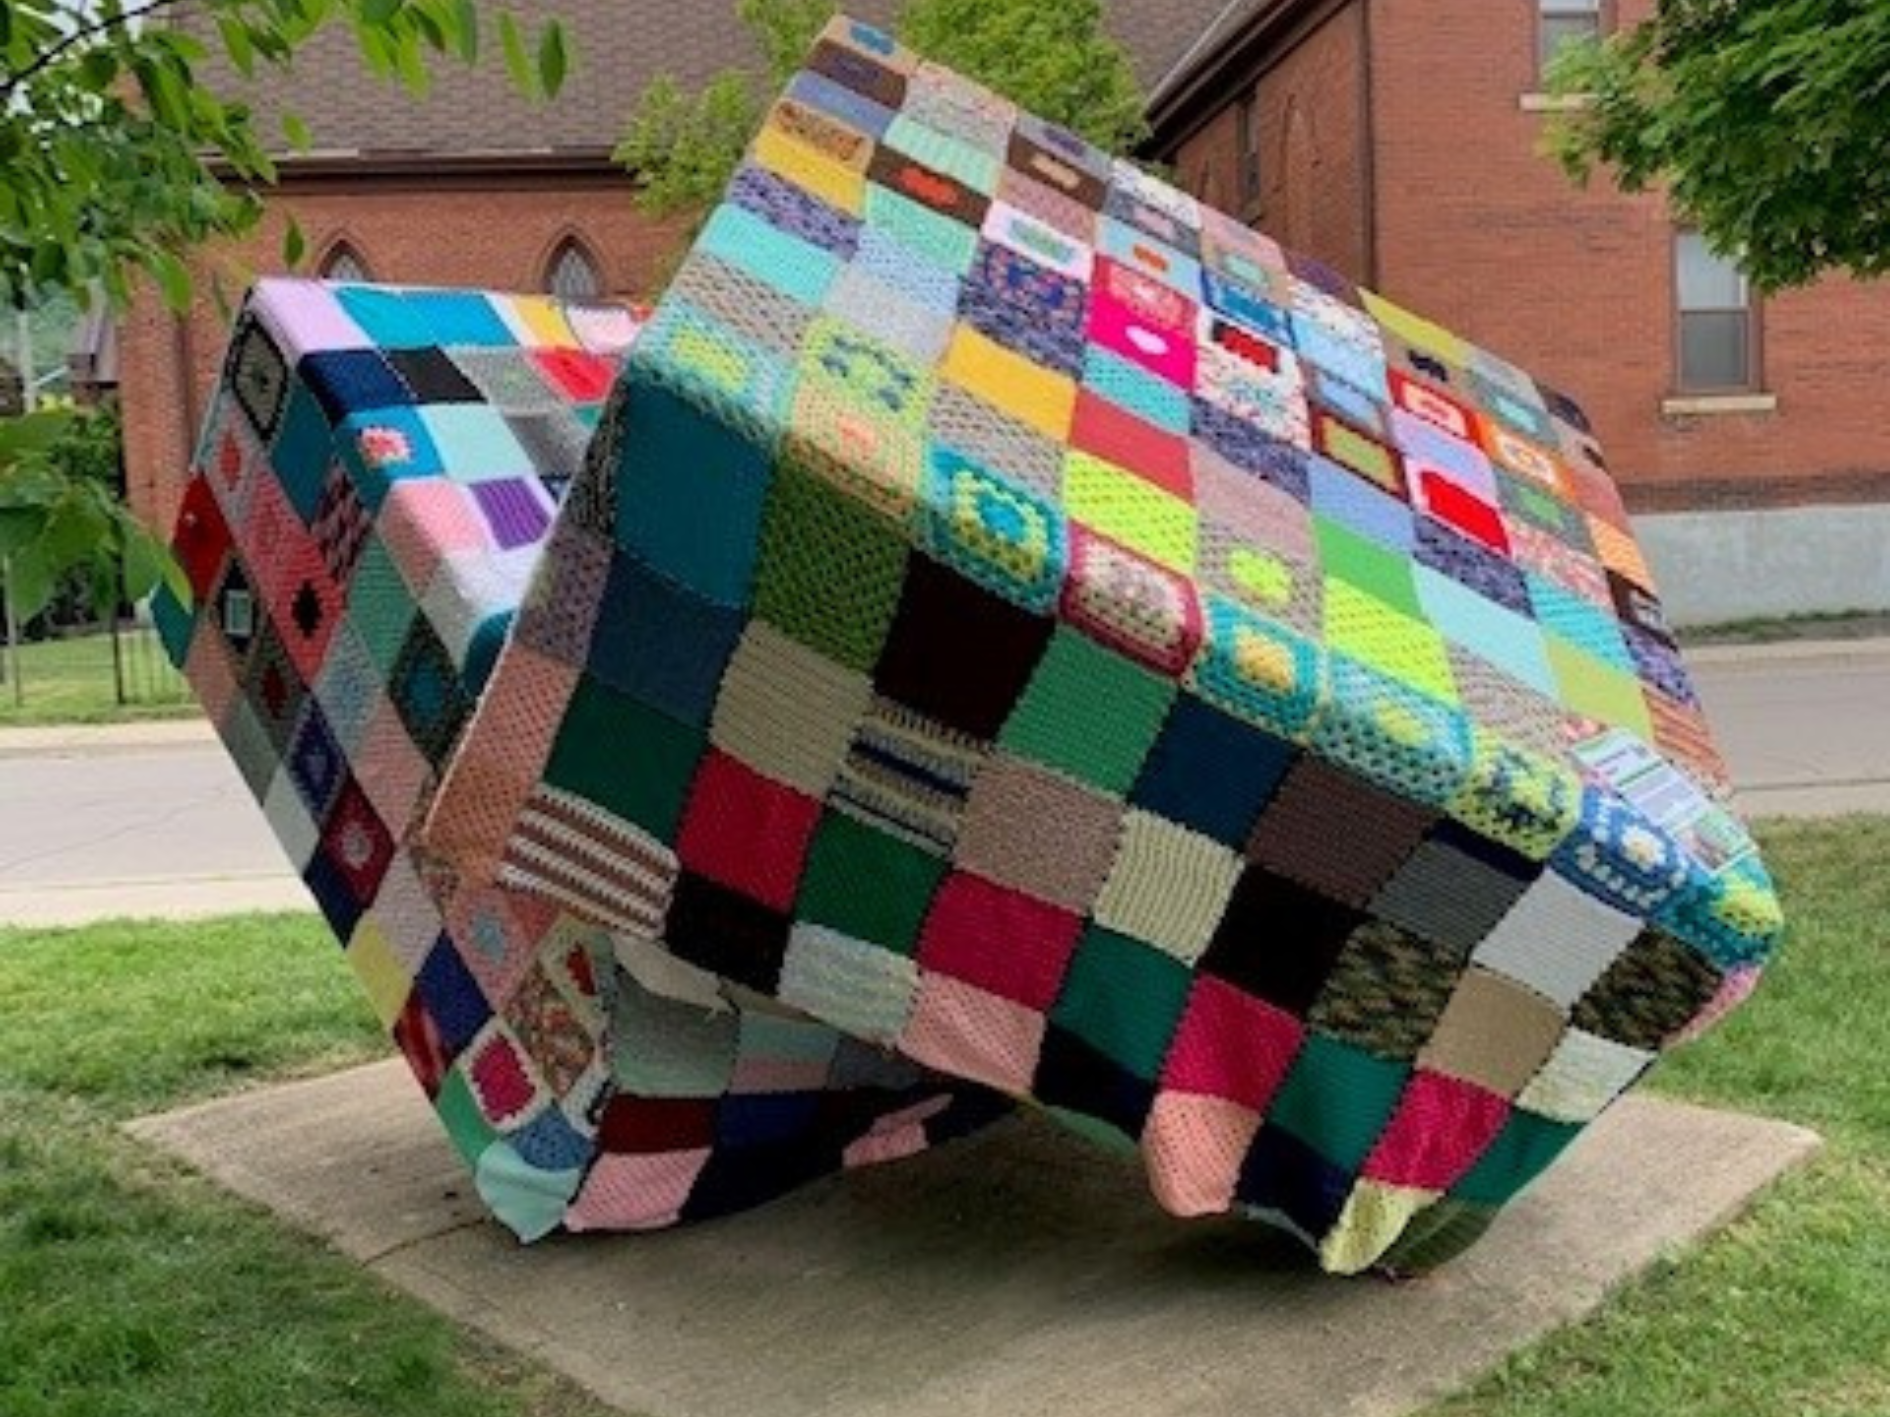 A cube sculpture in Grimsby Ontario that has been covered in yarn 